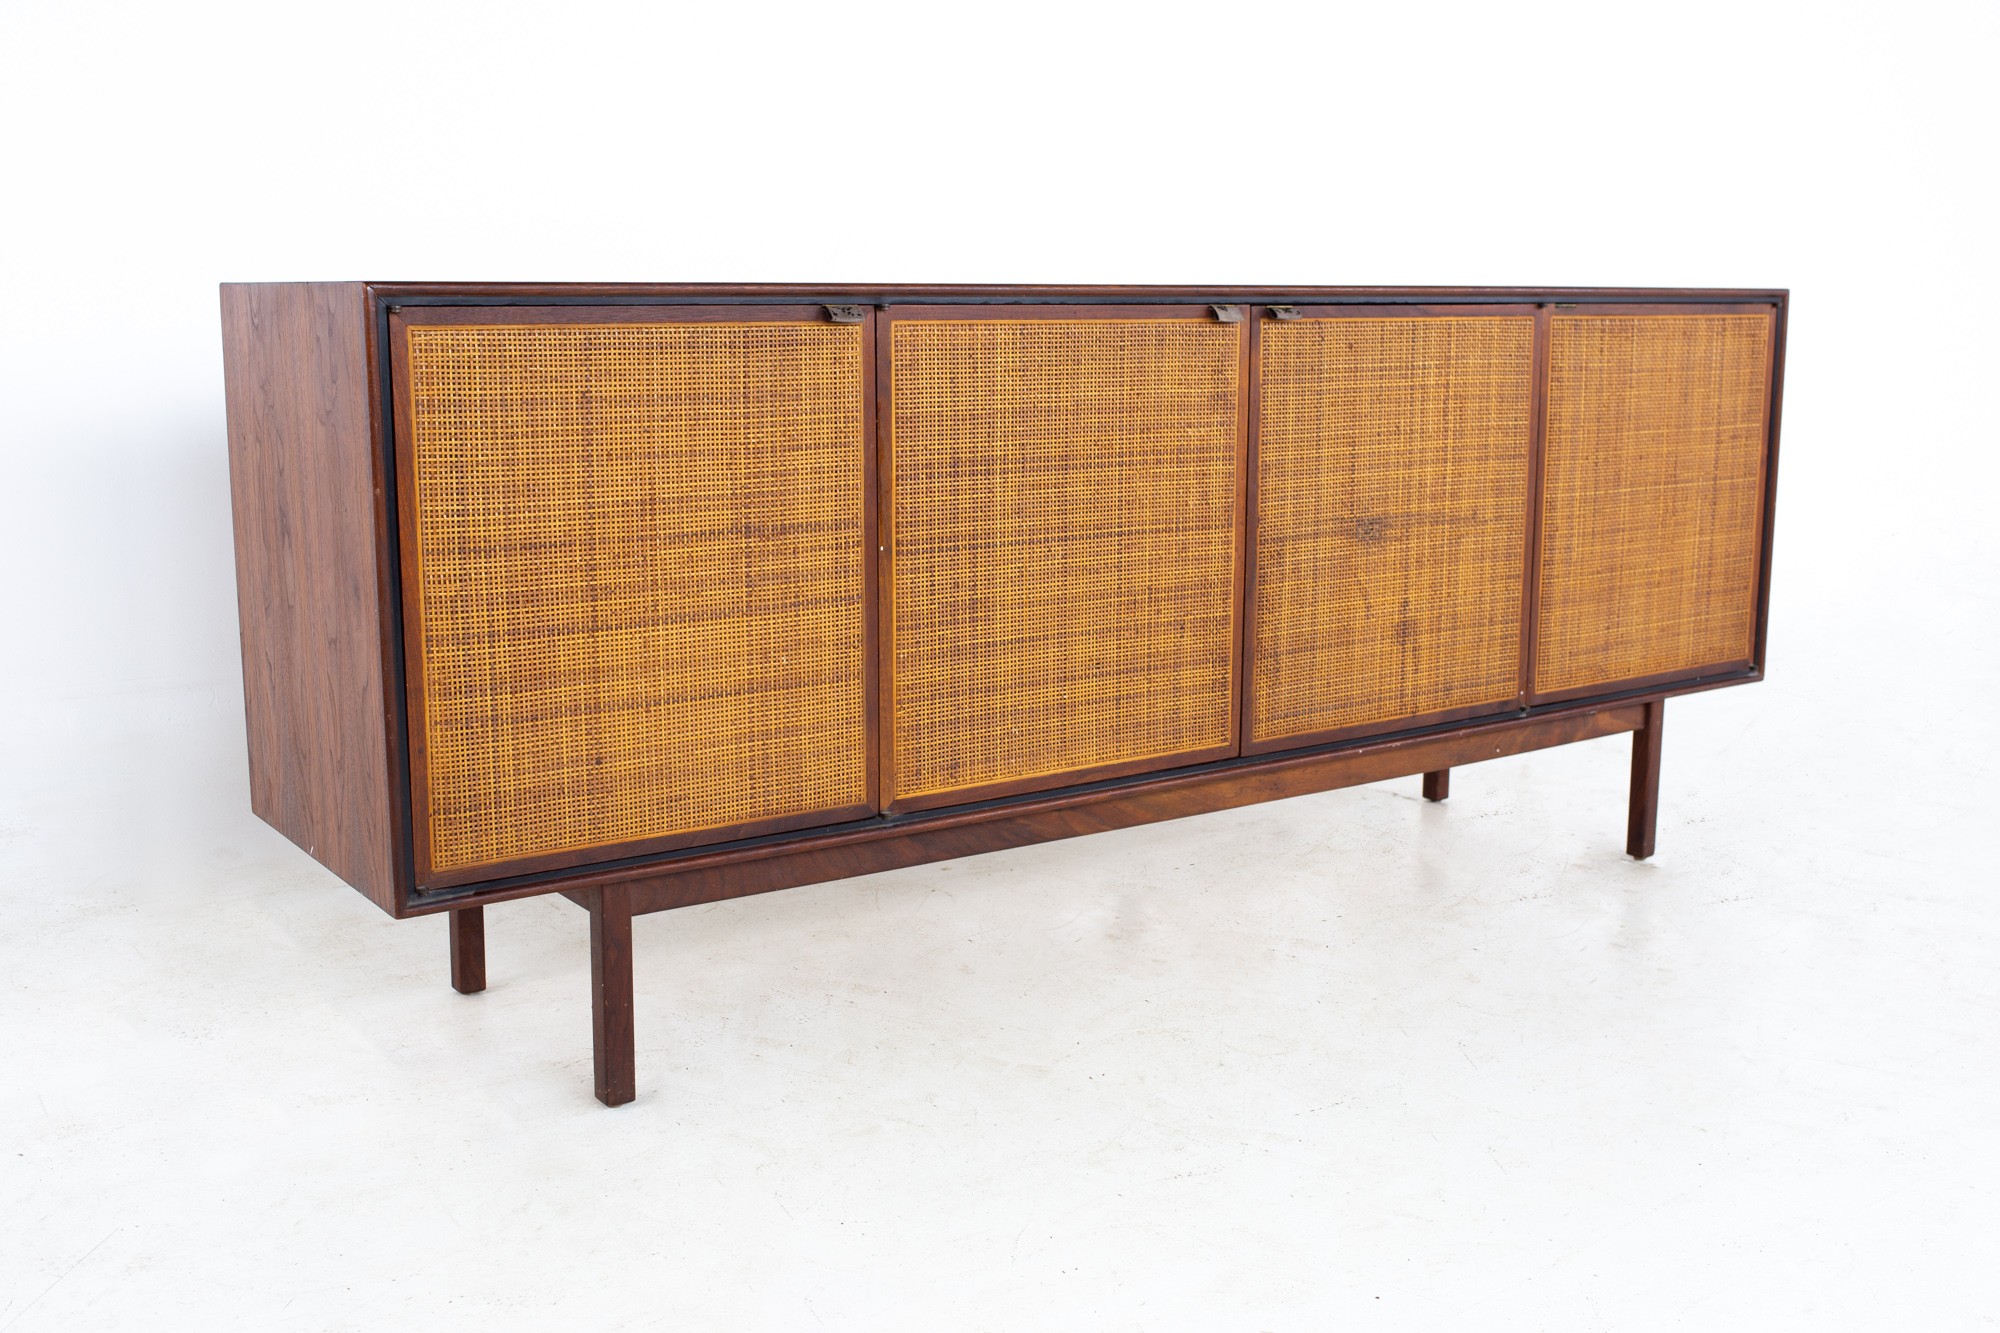 Founders Mid Century Walnut and Cane Sideboard Credenza